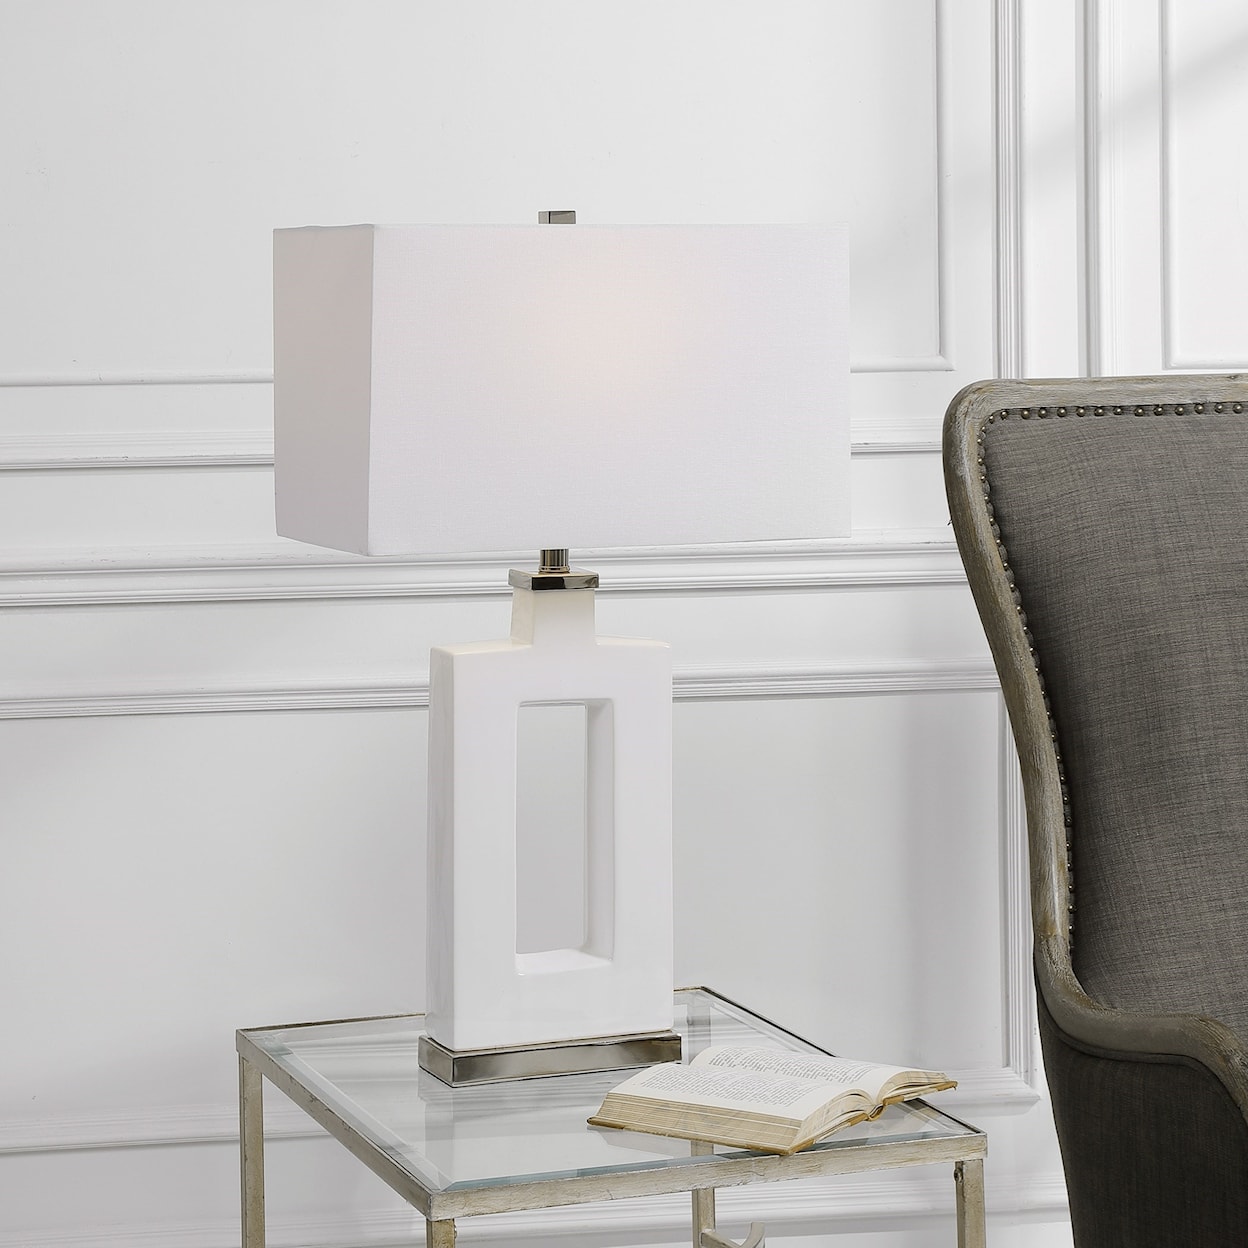 Uttermost Table Lamps Entry Modern White Table Lamp